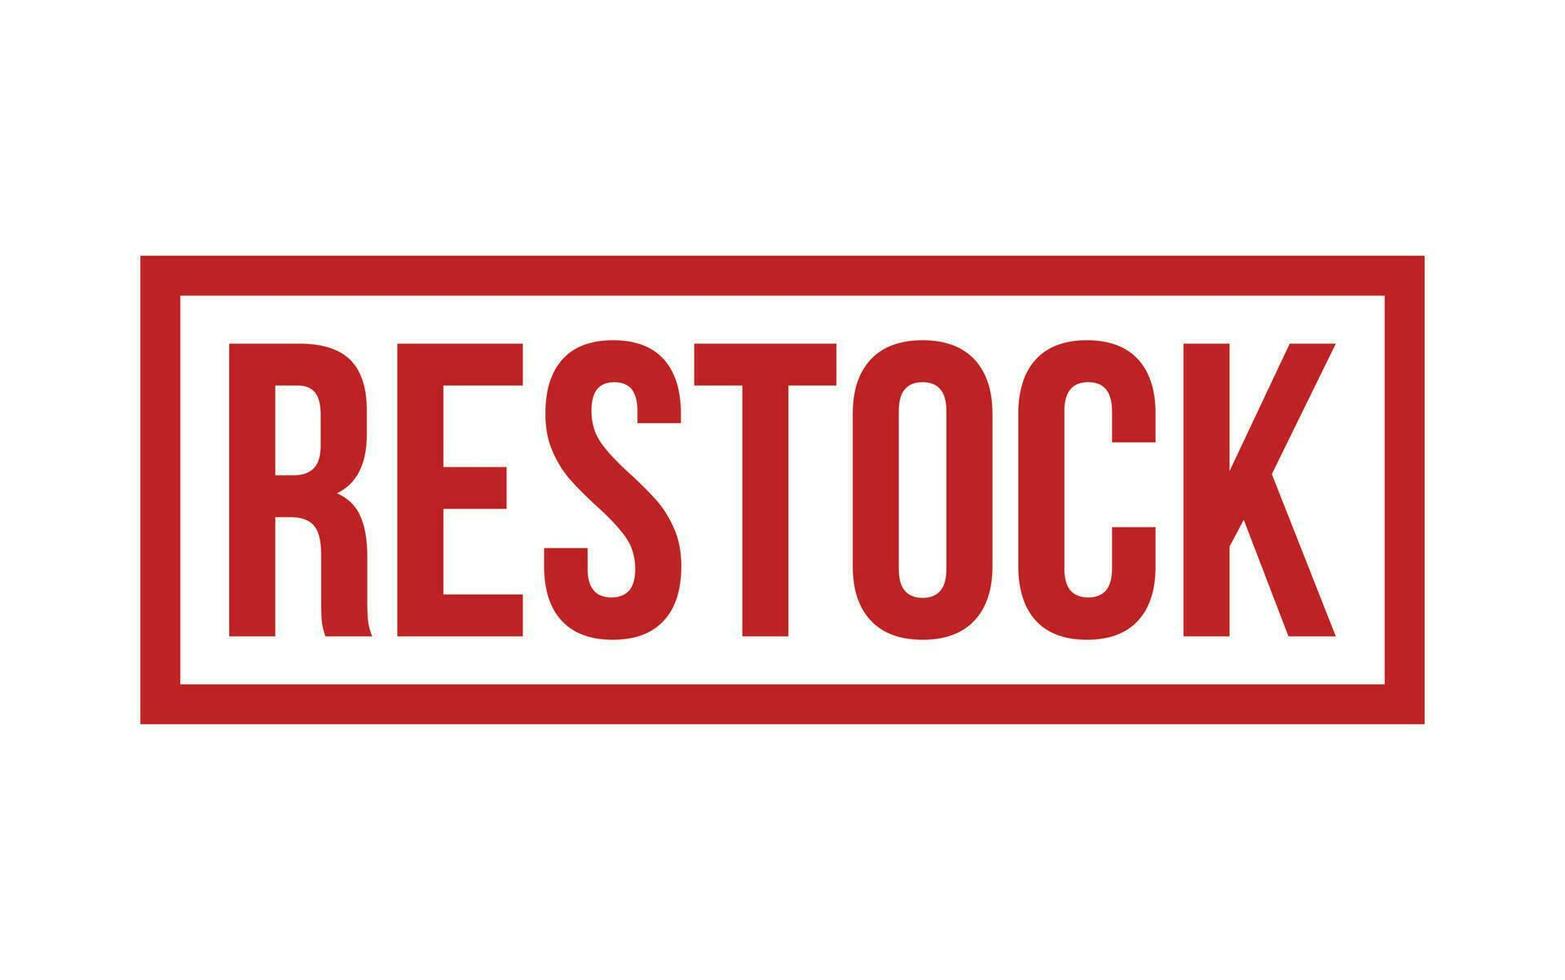 Red Restock Rubber Stamp Seal Vector